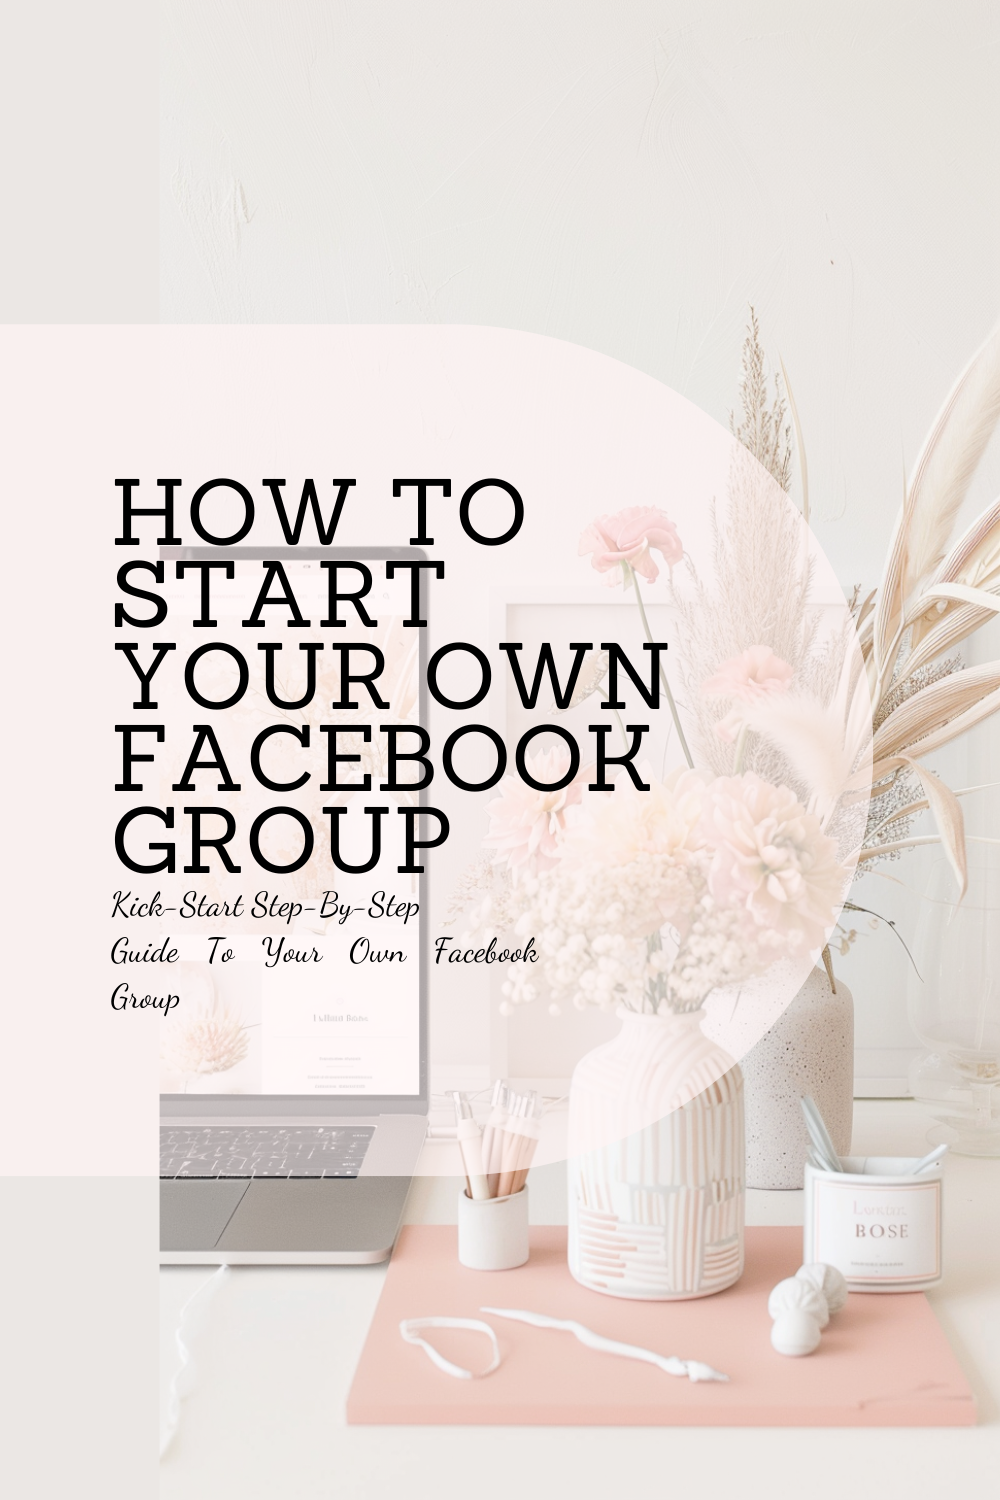 How to Start a Facebook Group for Business